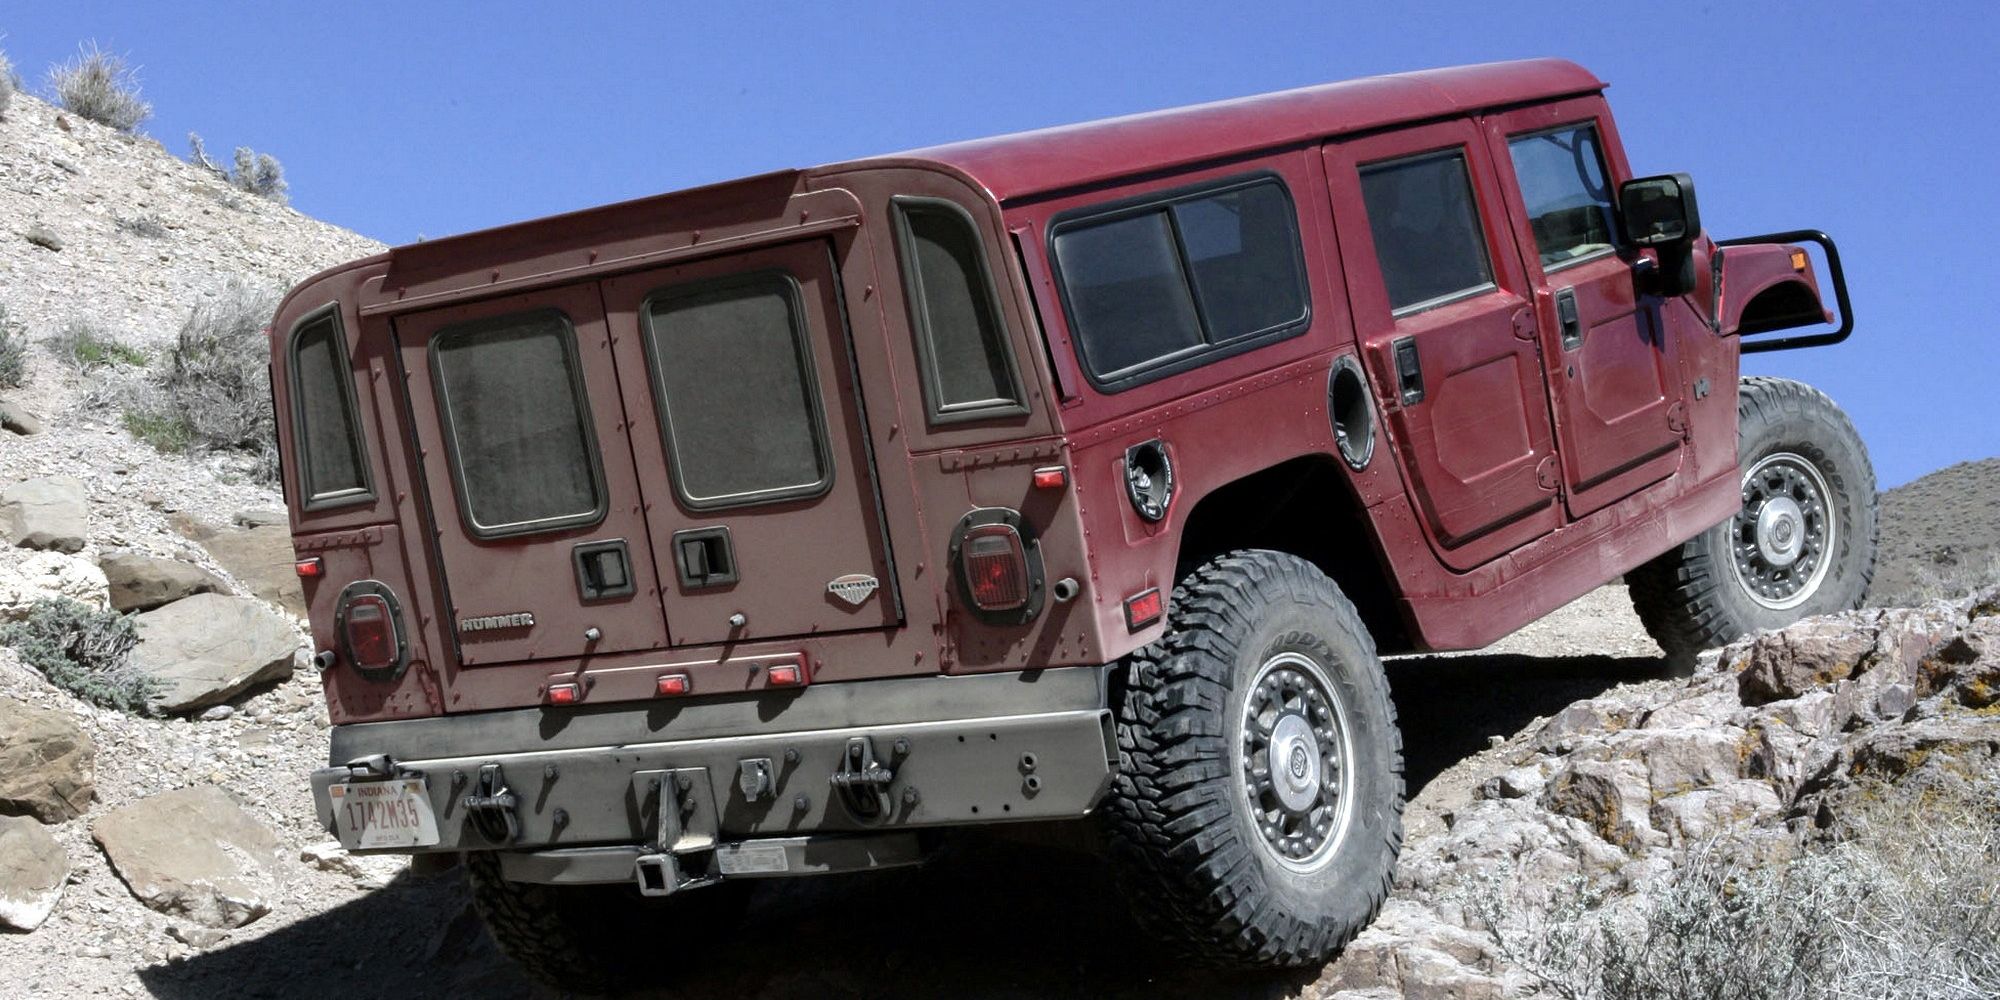 The rear of an H1 wagon off-roading